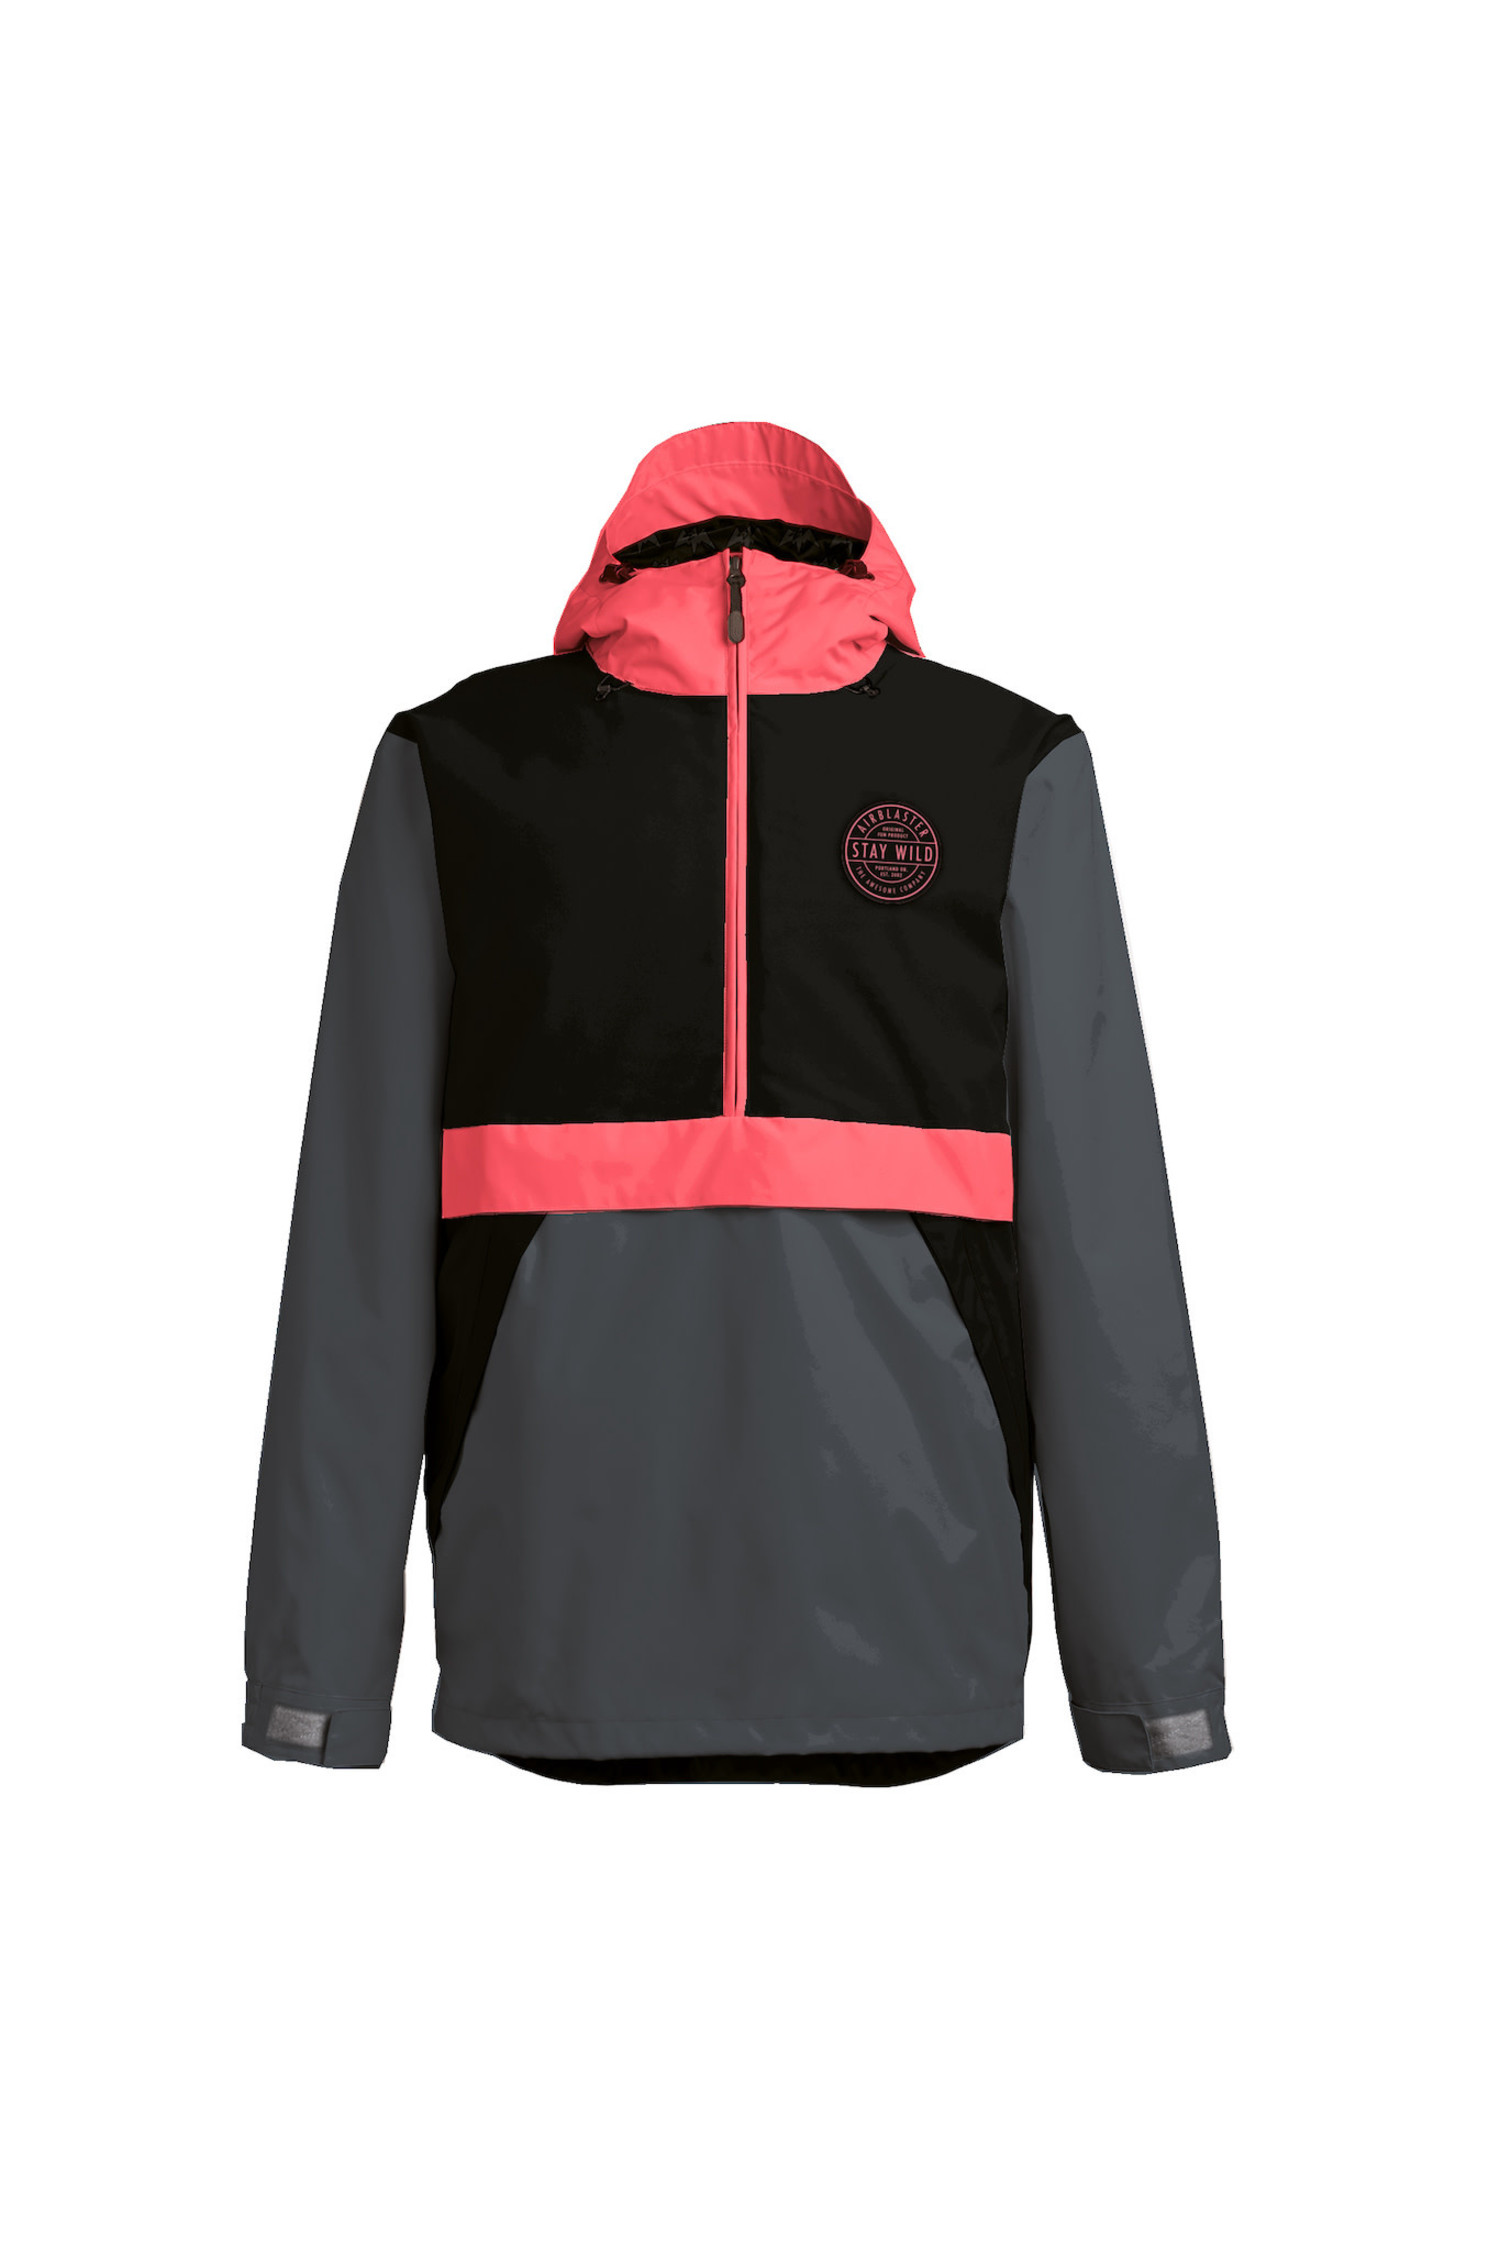 AIRBLASTER Trenchover Jacket Black / Hot Coral - Edge of the World